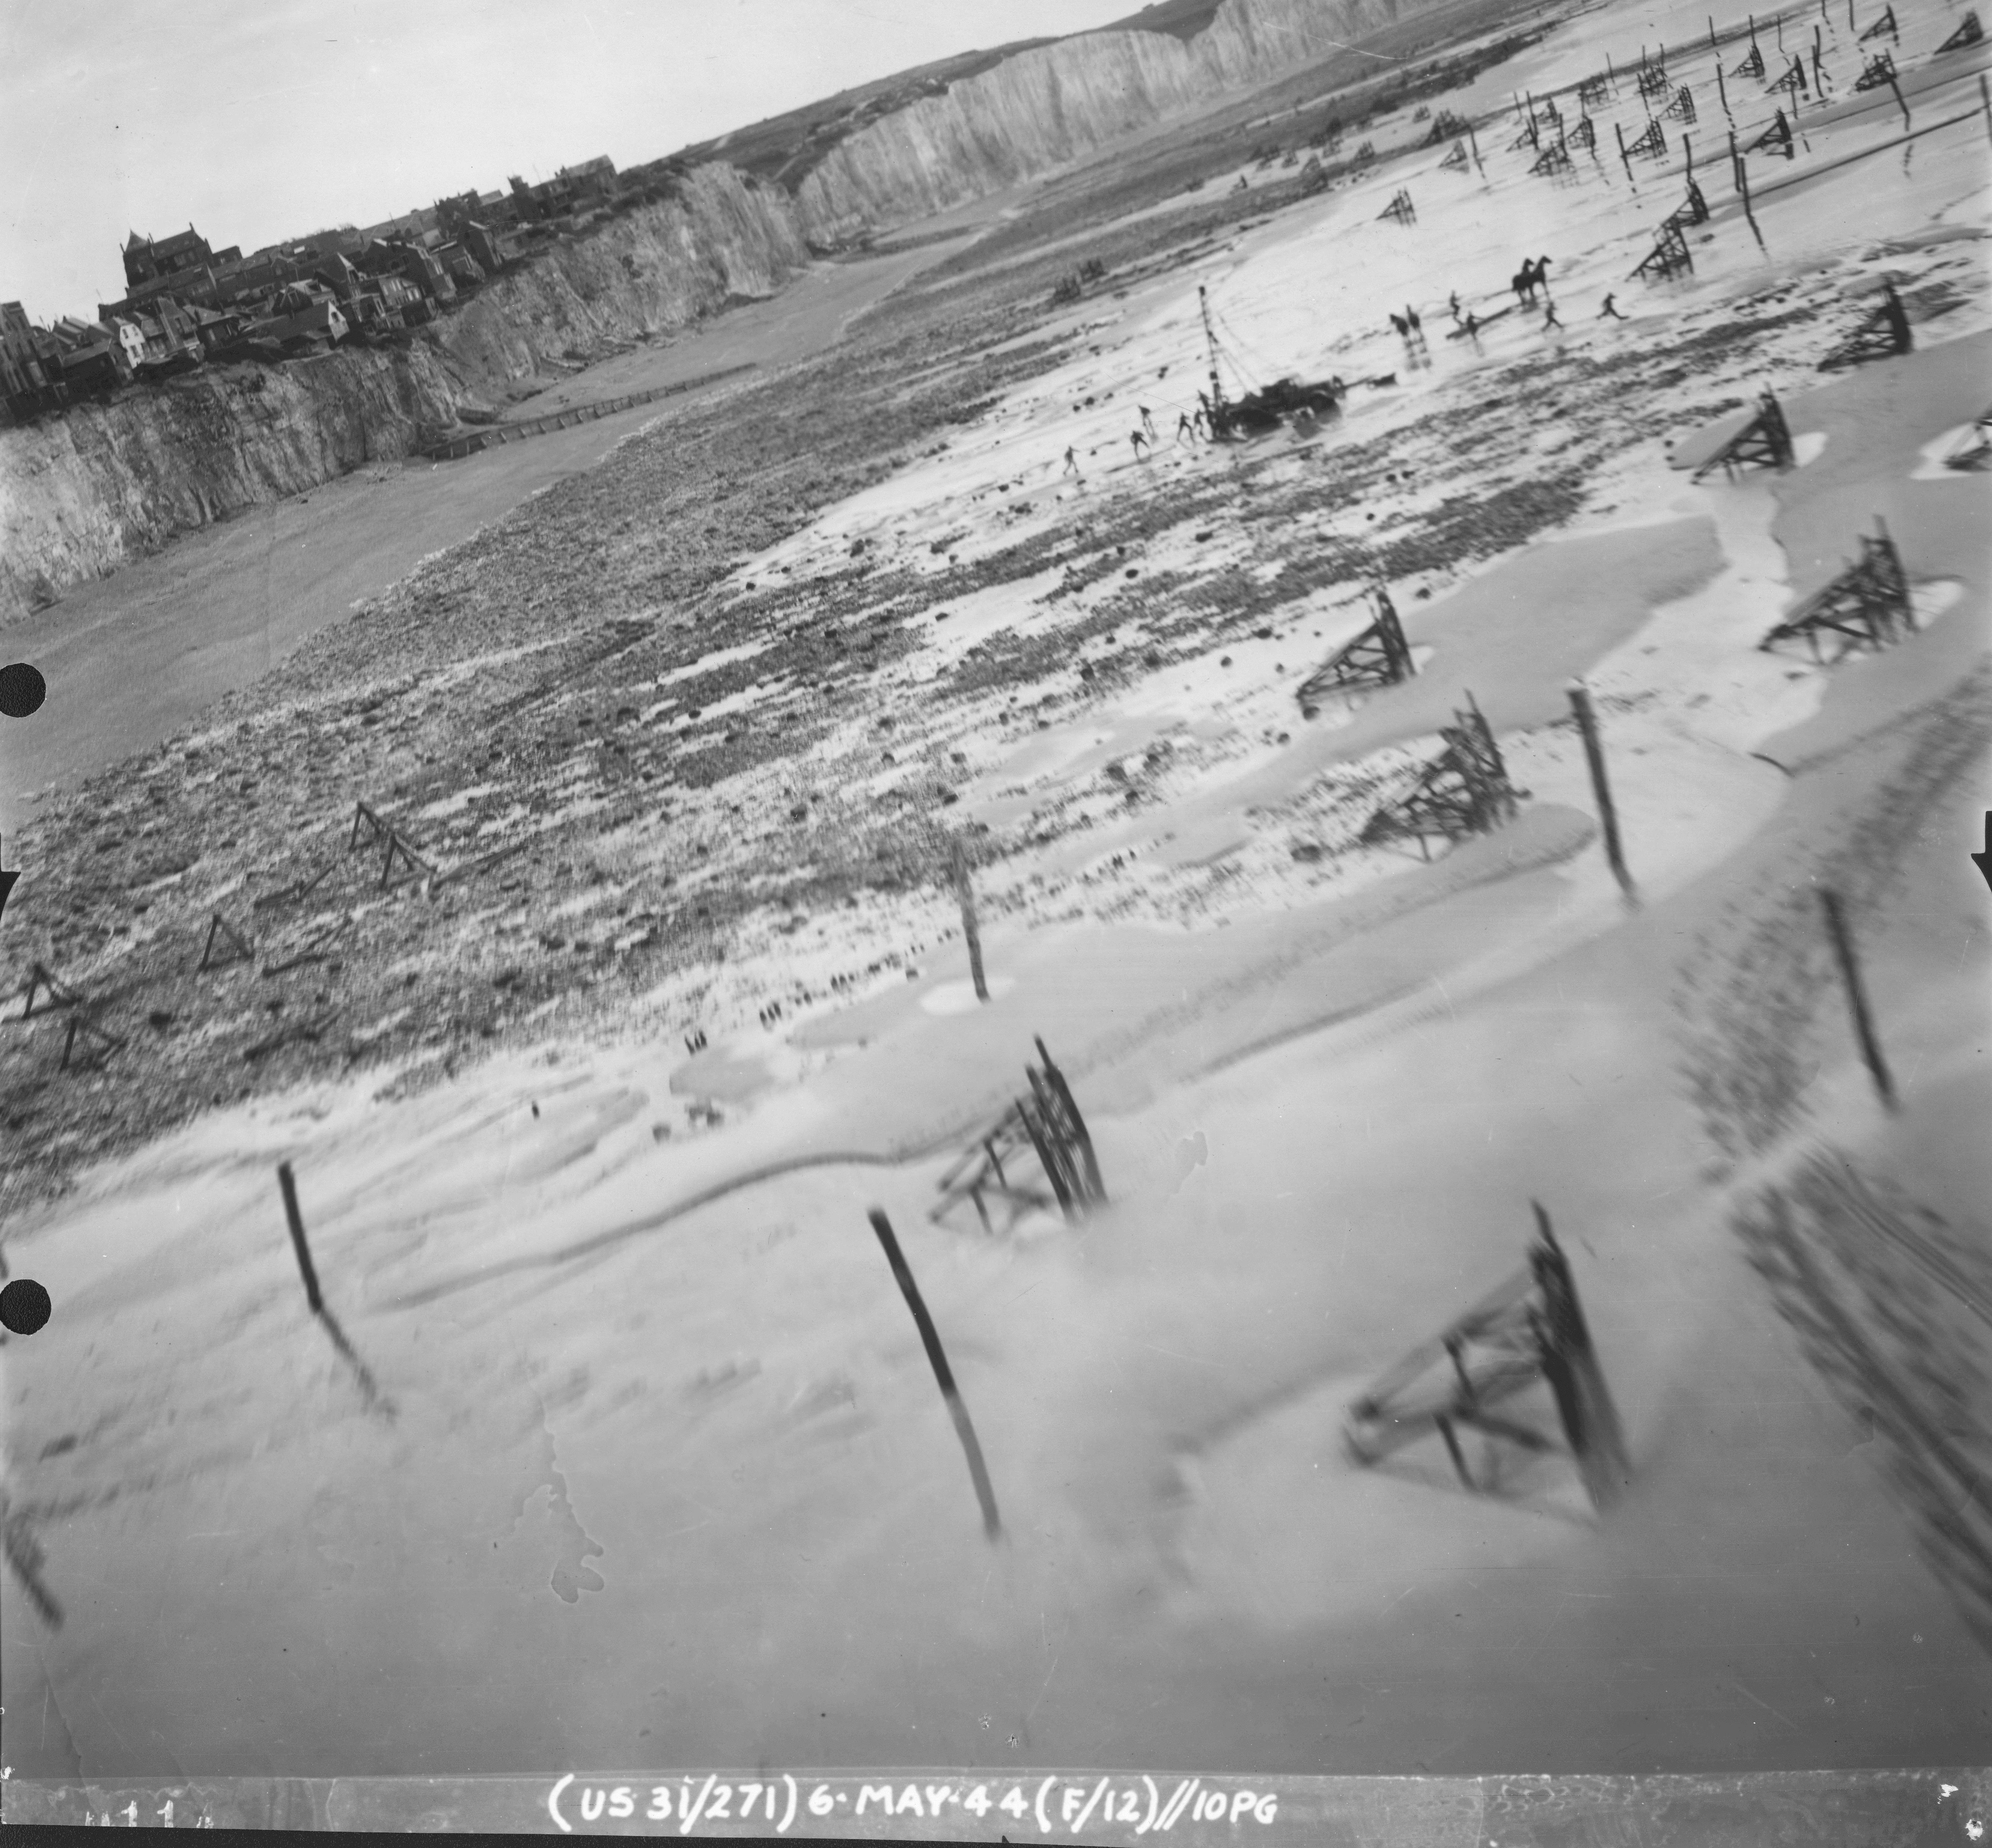 Normandy beach defenses, France, 6 May 1944, photo 3 of 4